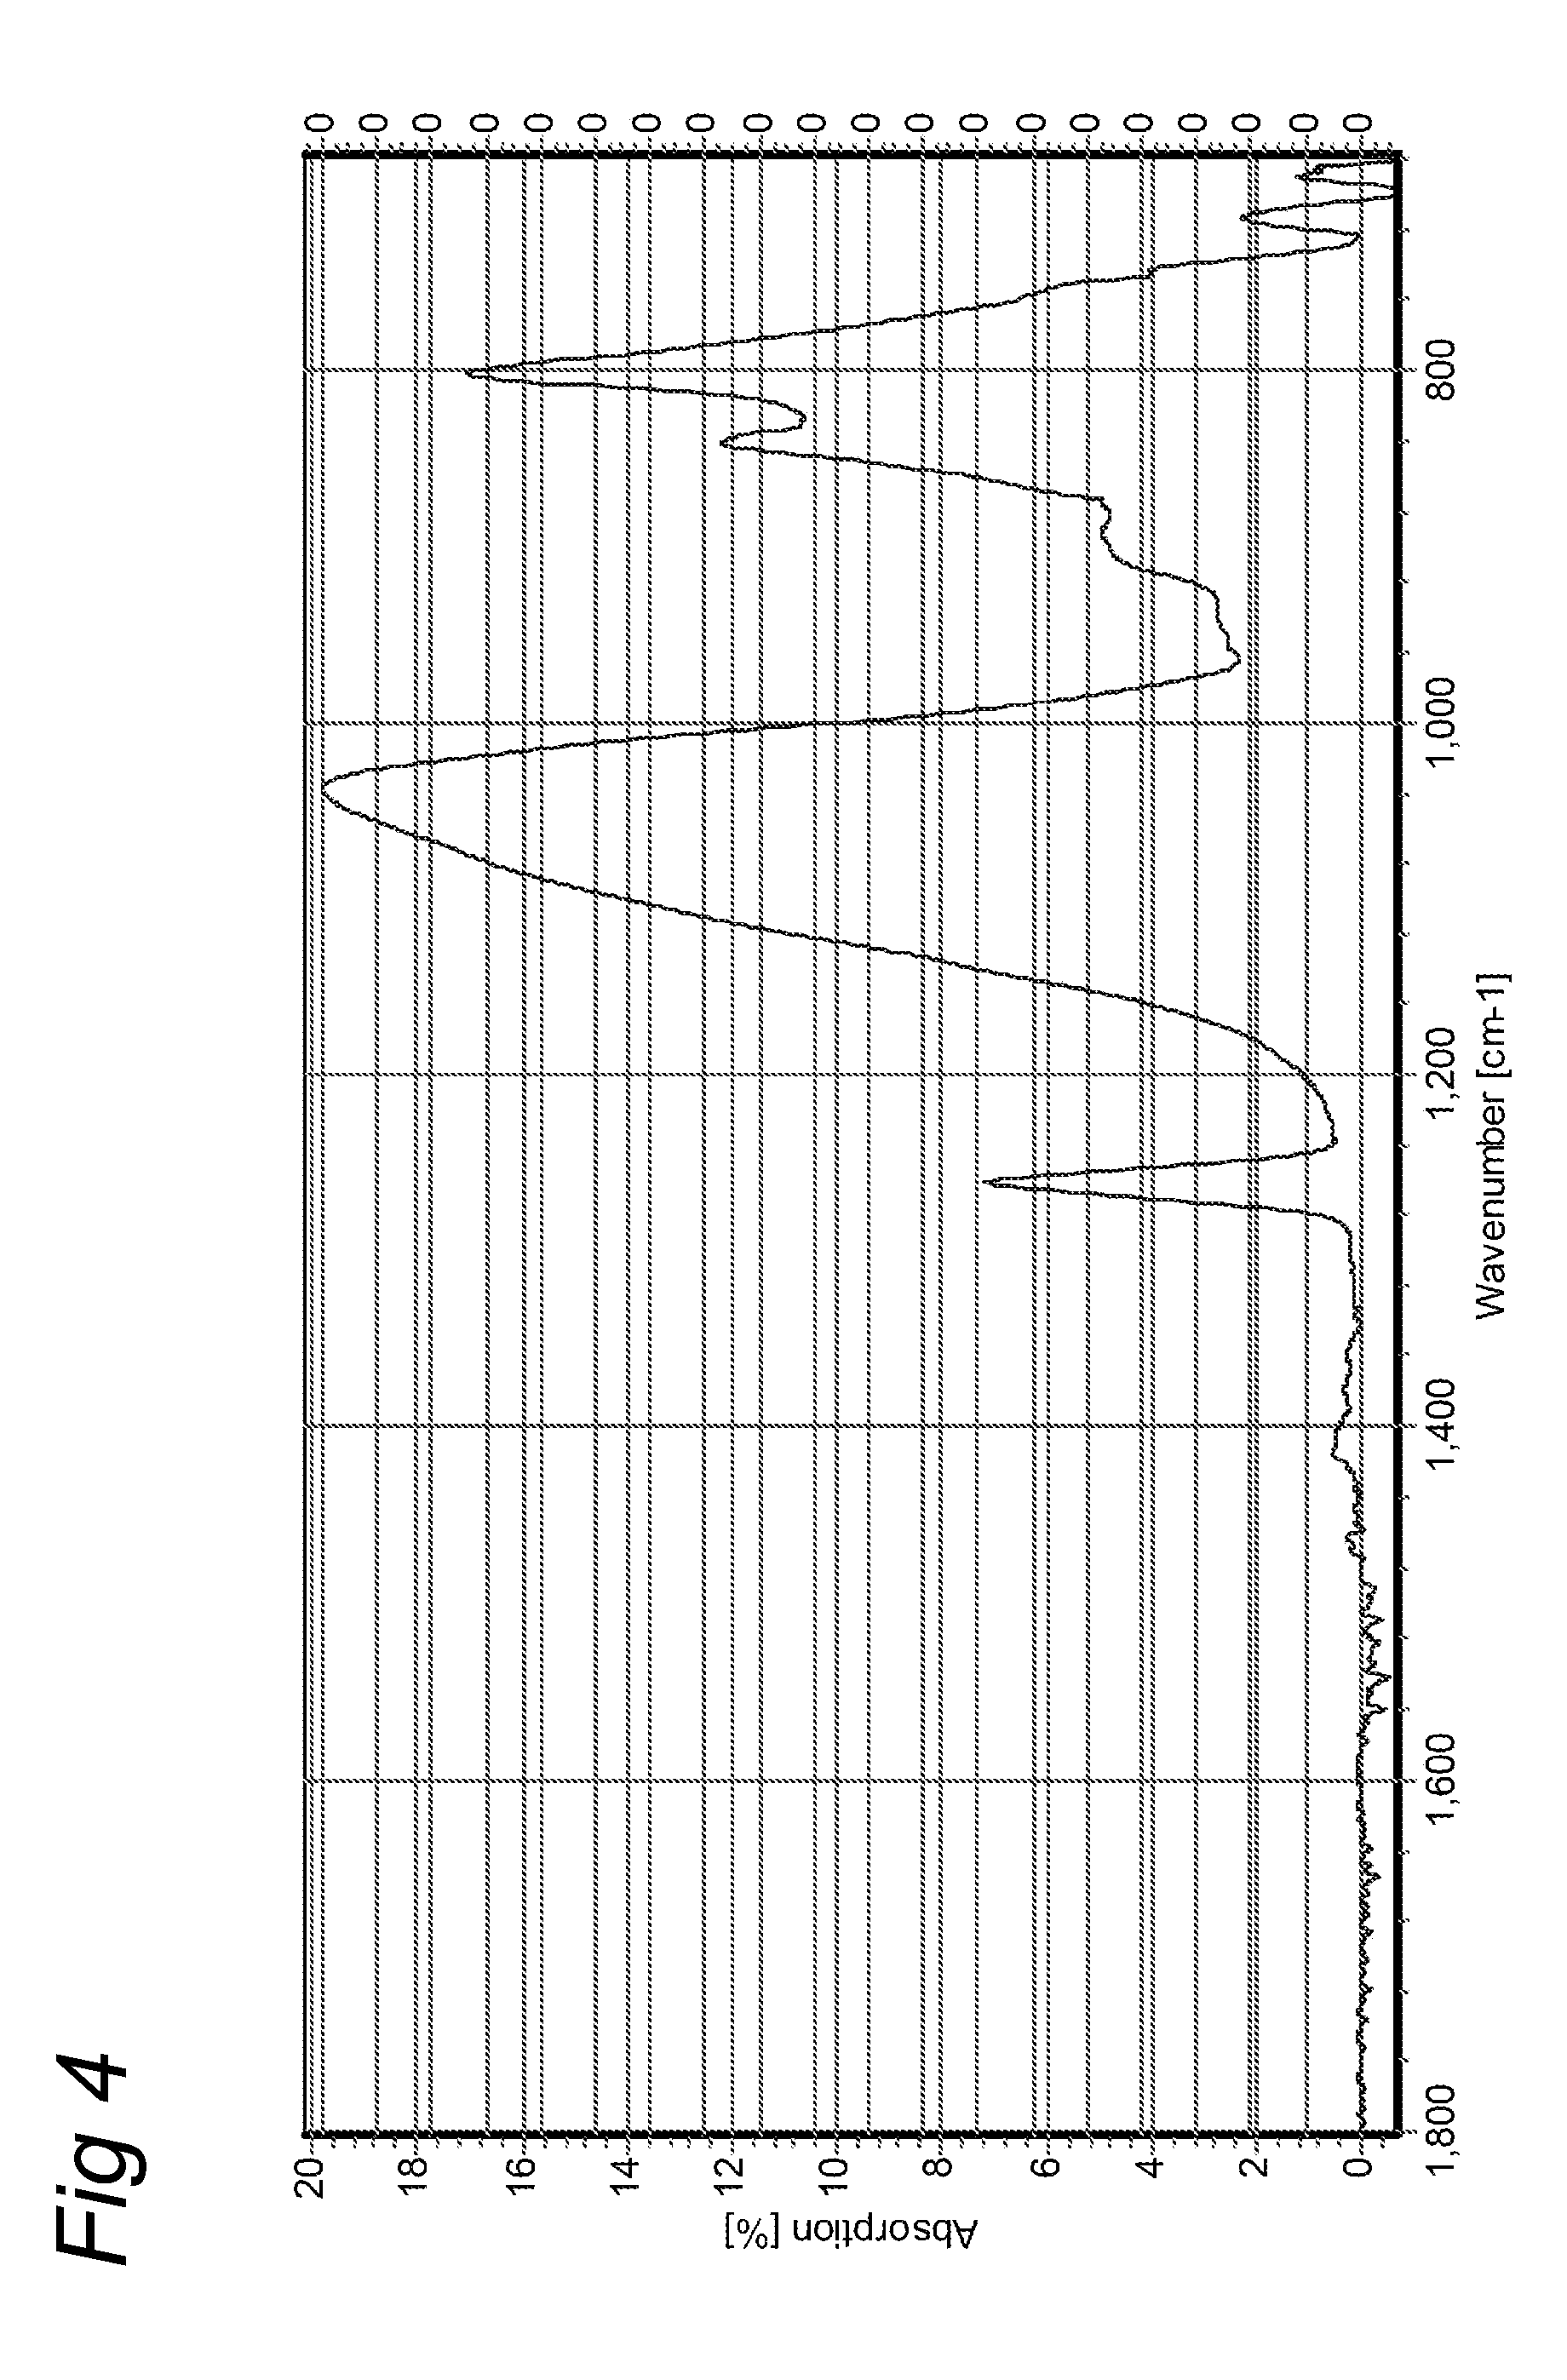 Method for deposition using pulsed atmospheric pressure glow discharge